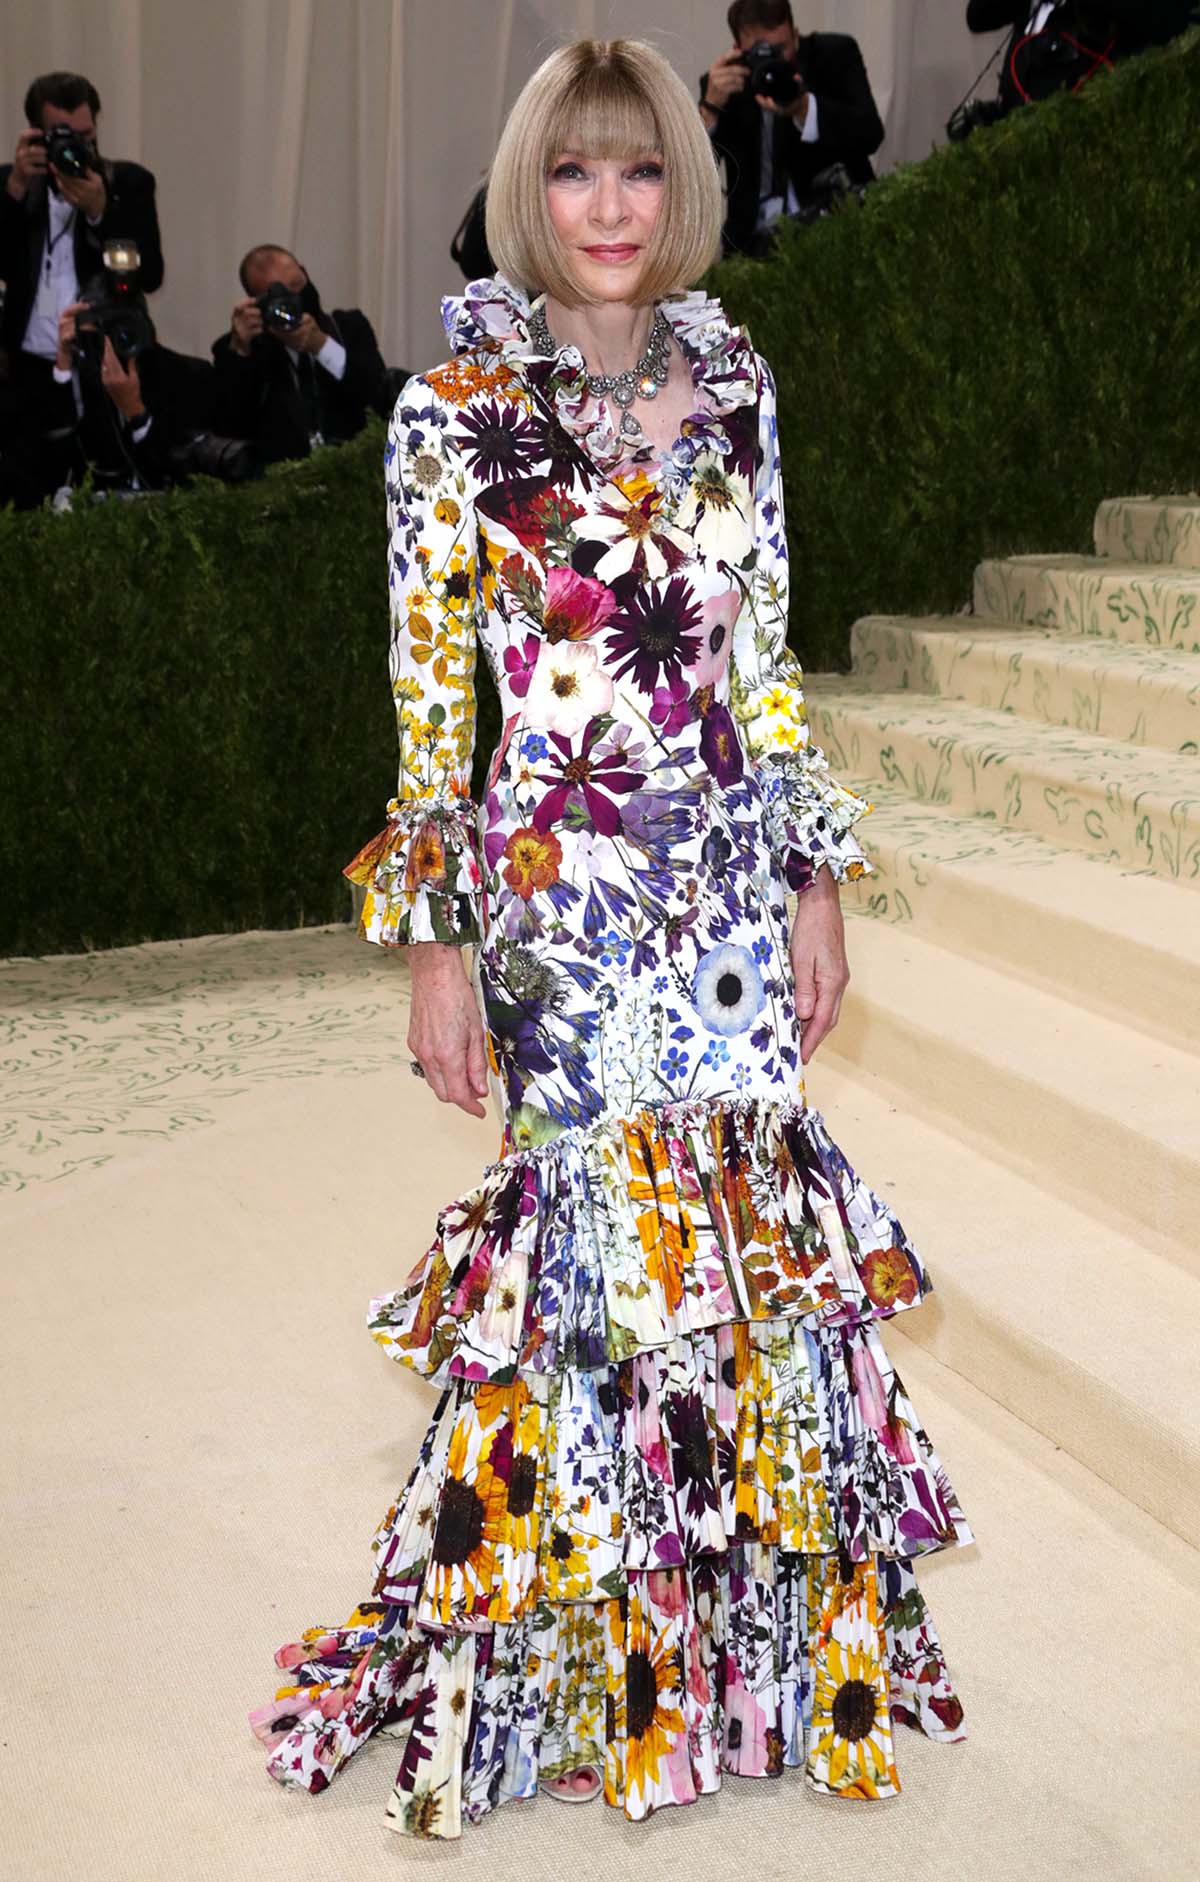 Met Gala 2021 Anna Wintour’s Red Carpet Fashion, Gown Us Weekly